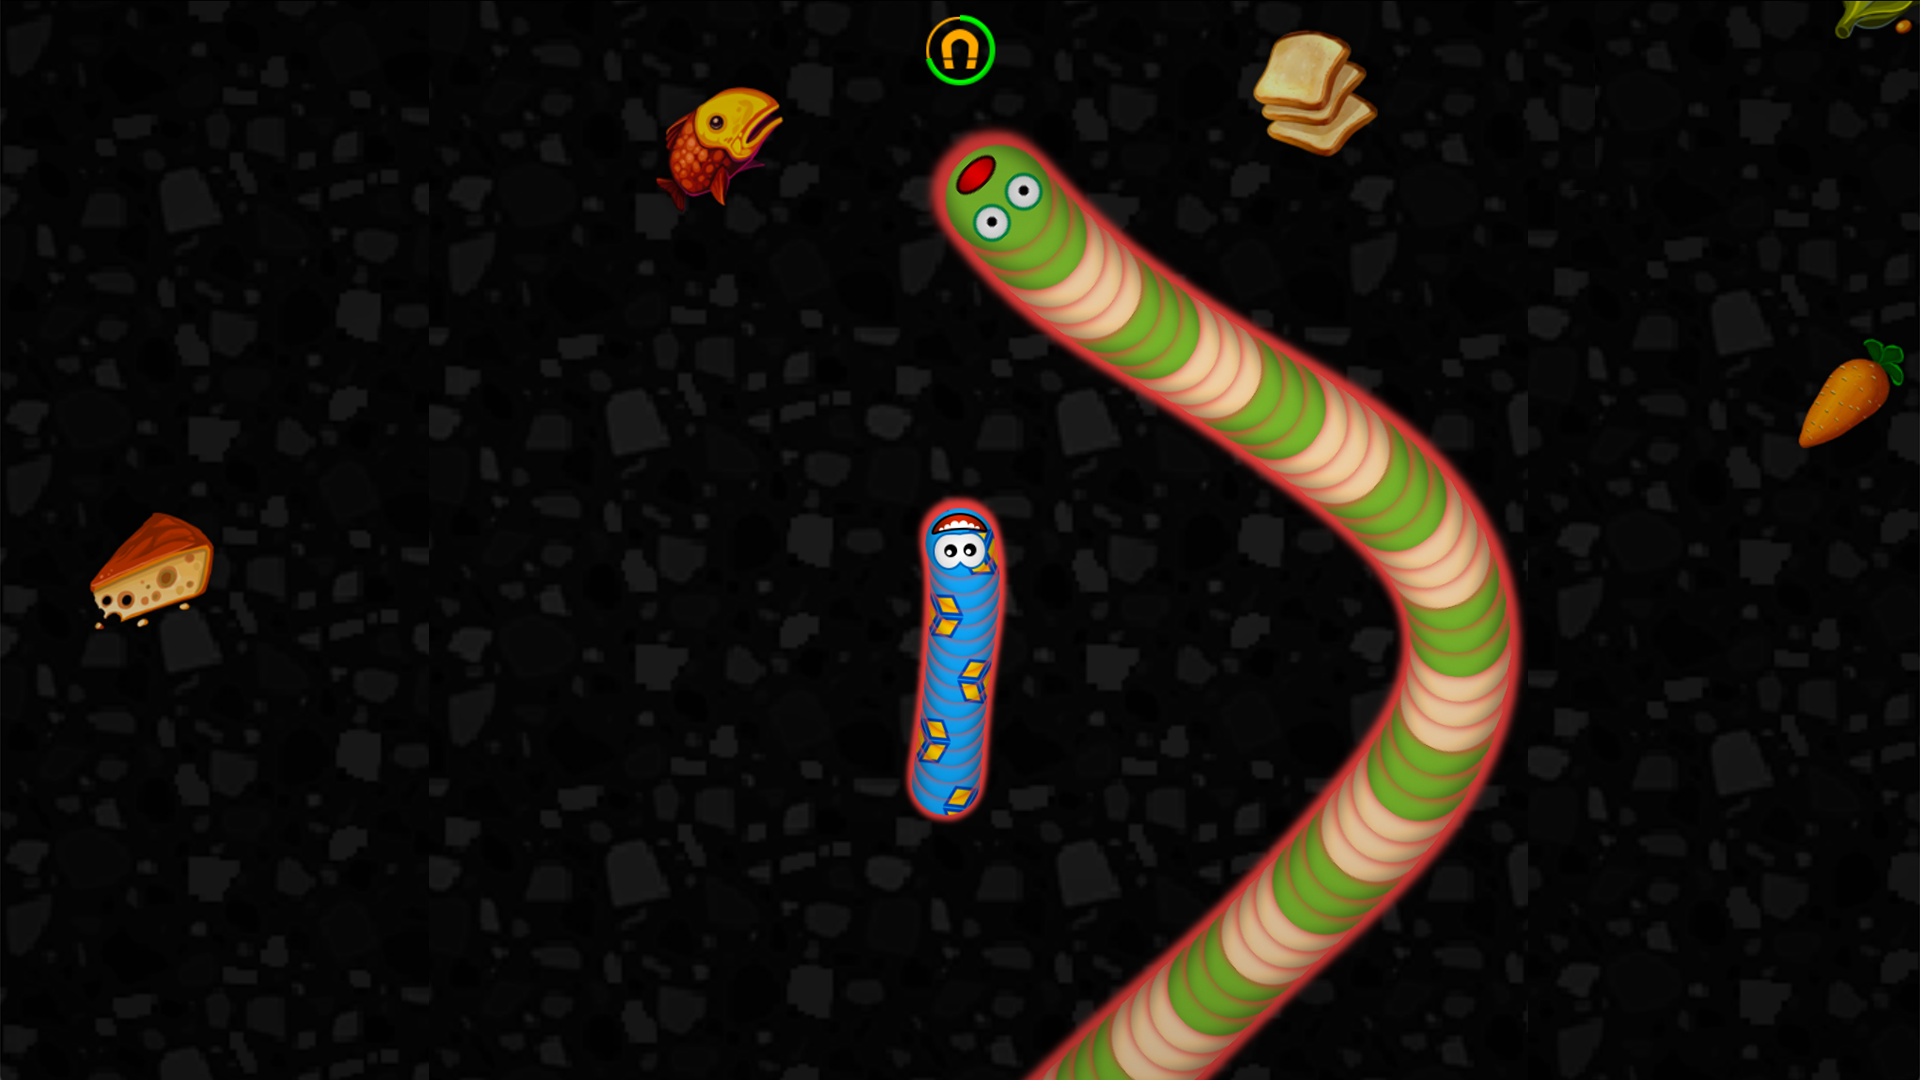 Worms bitcoinhelp.fun v MOD APK (Unlimited Coins/Skins Unlocked) free download: MB